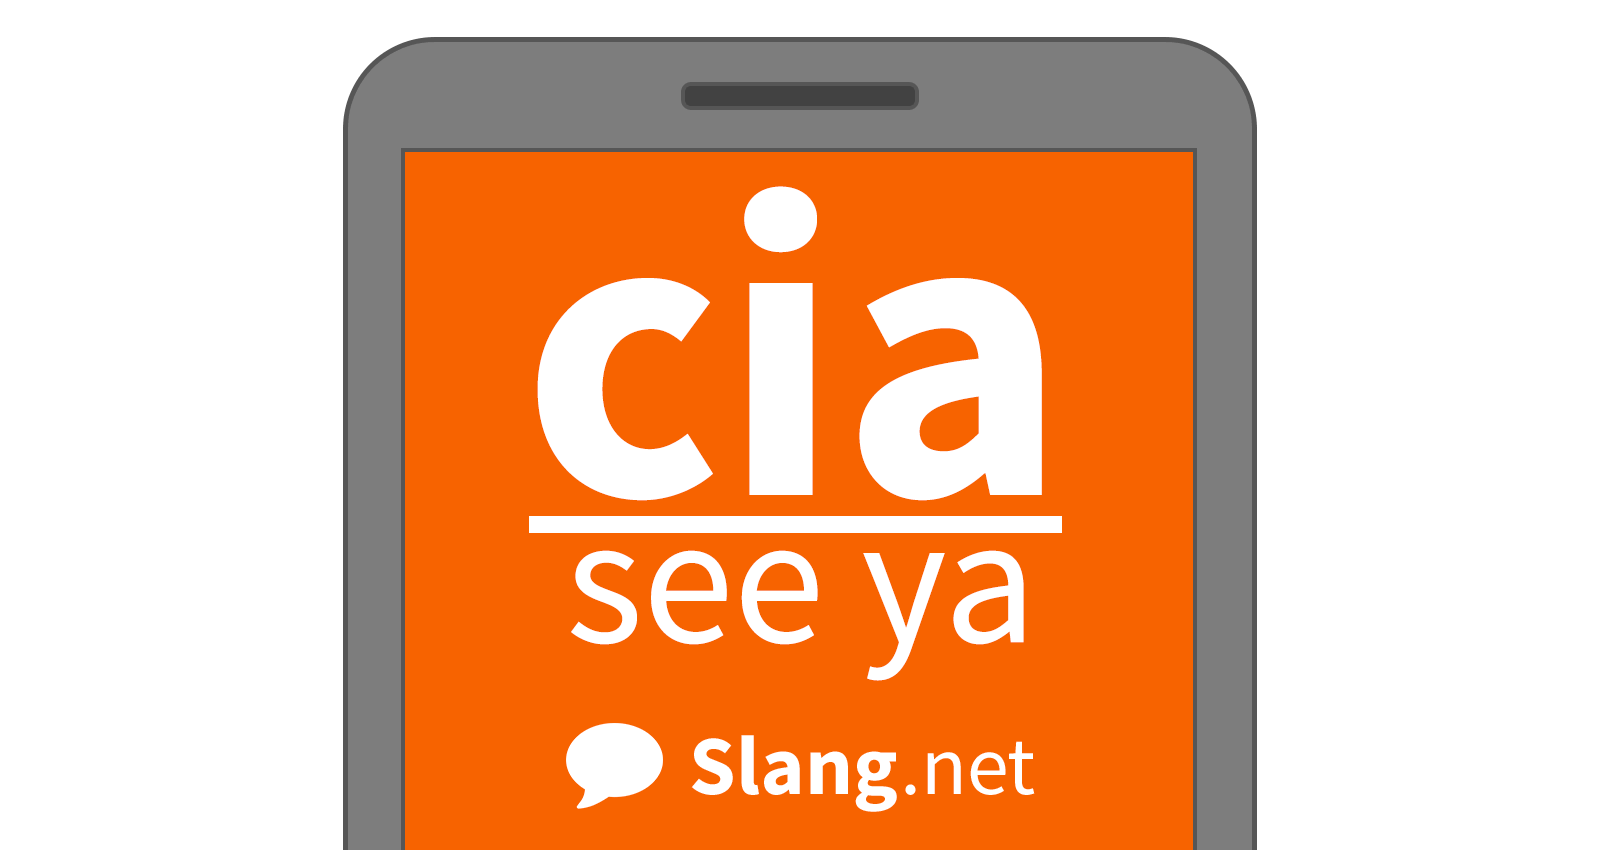 You will likely see cia in messages